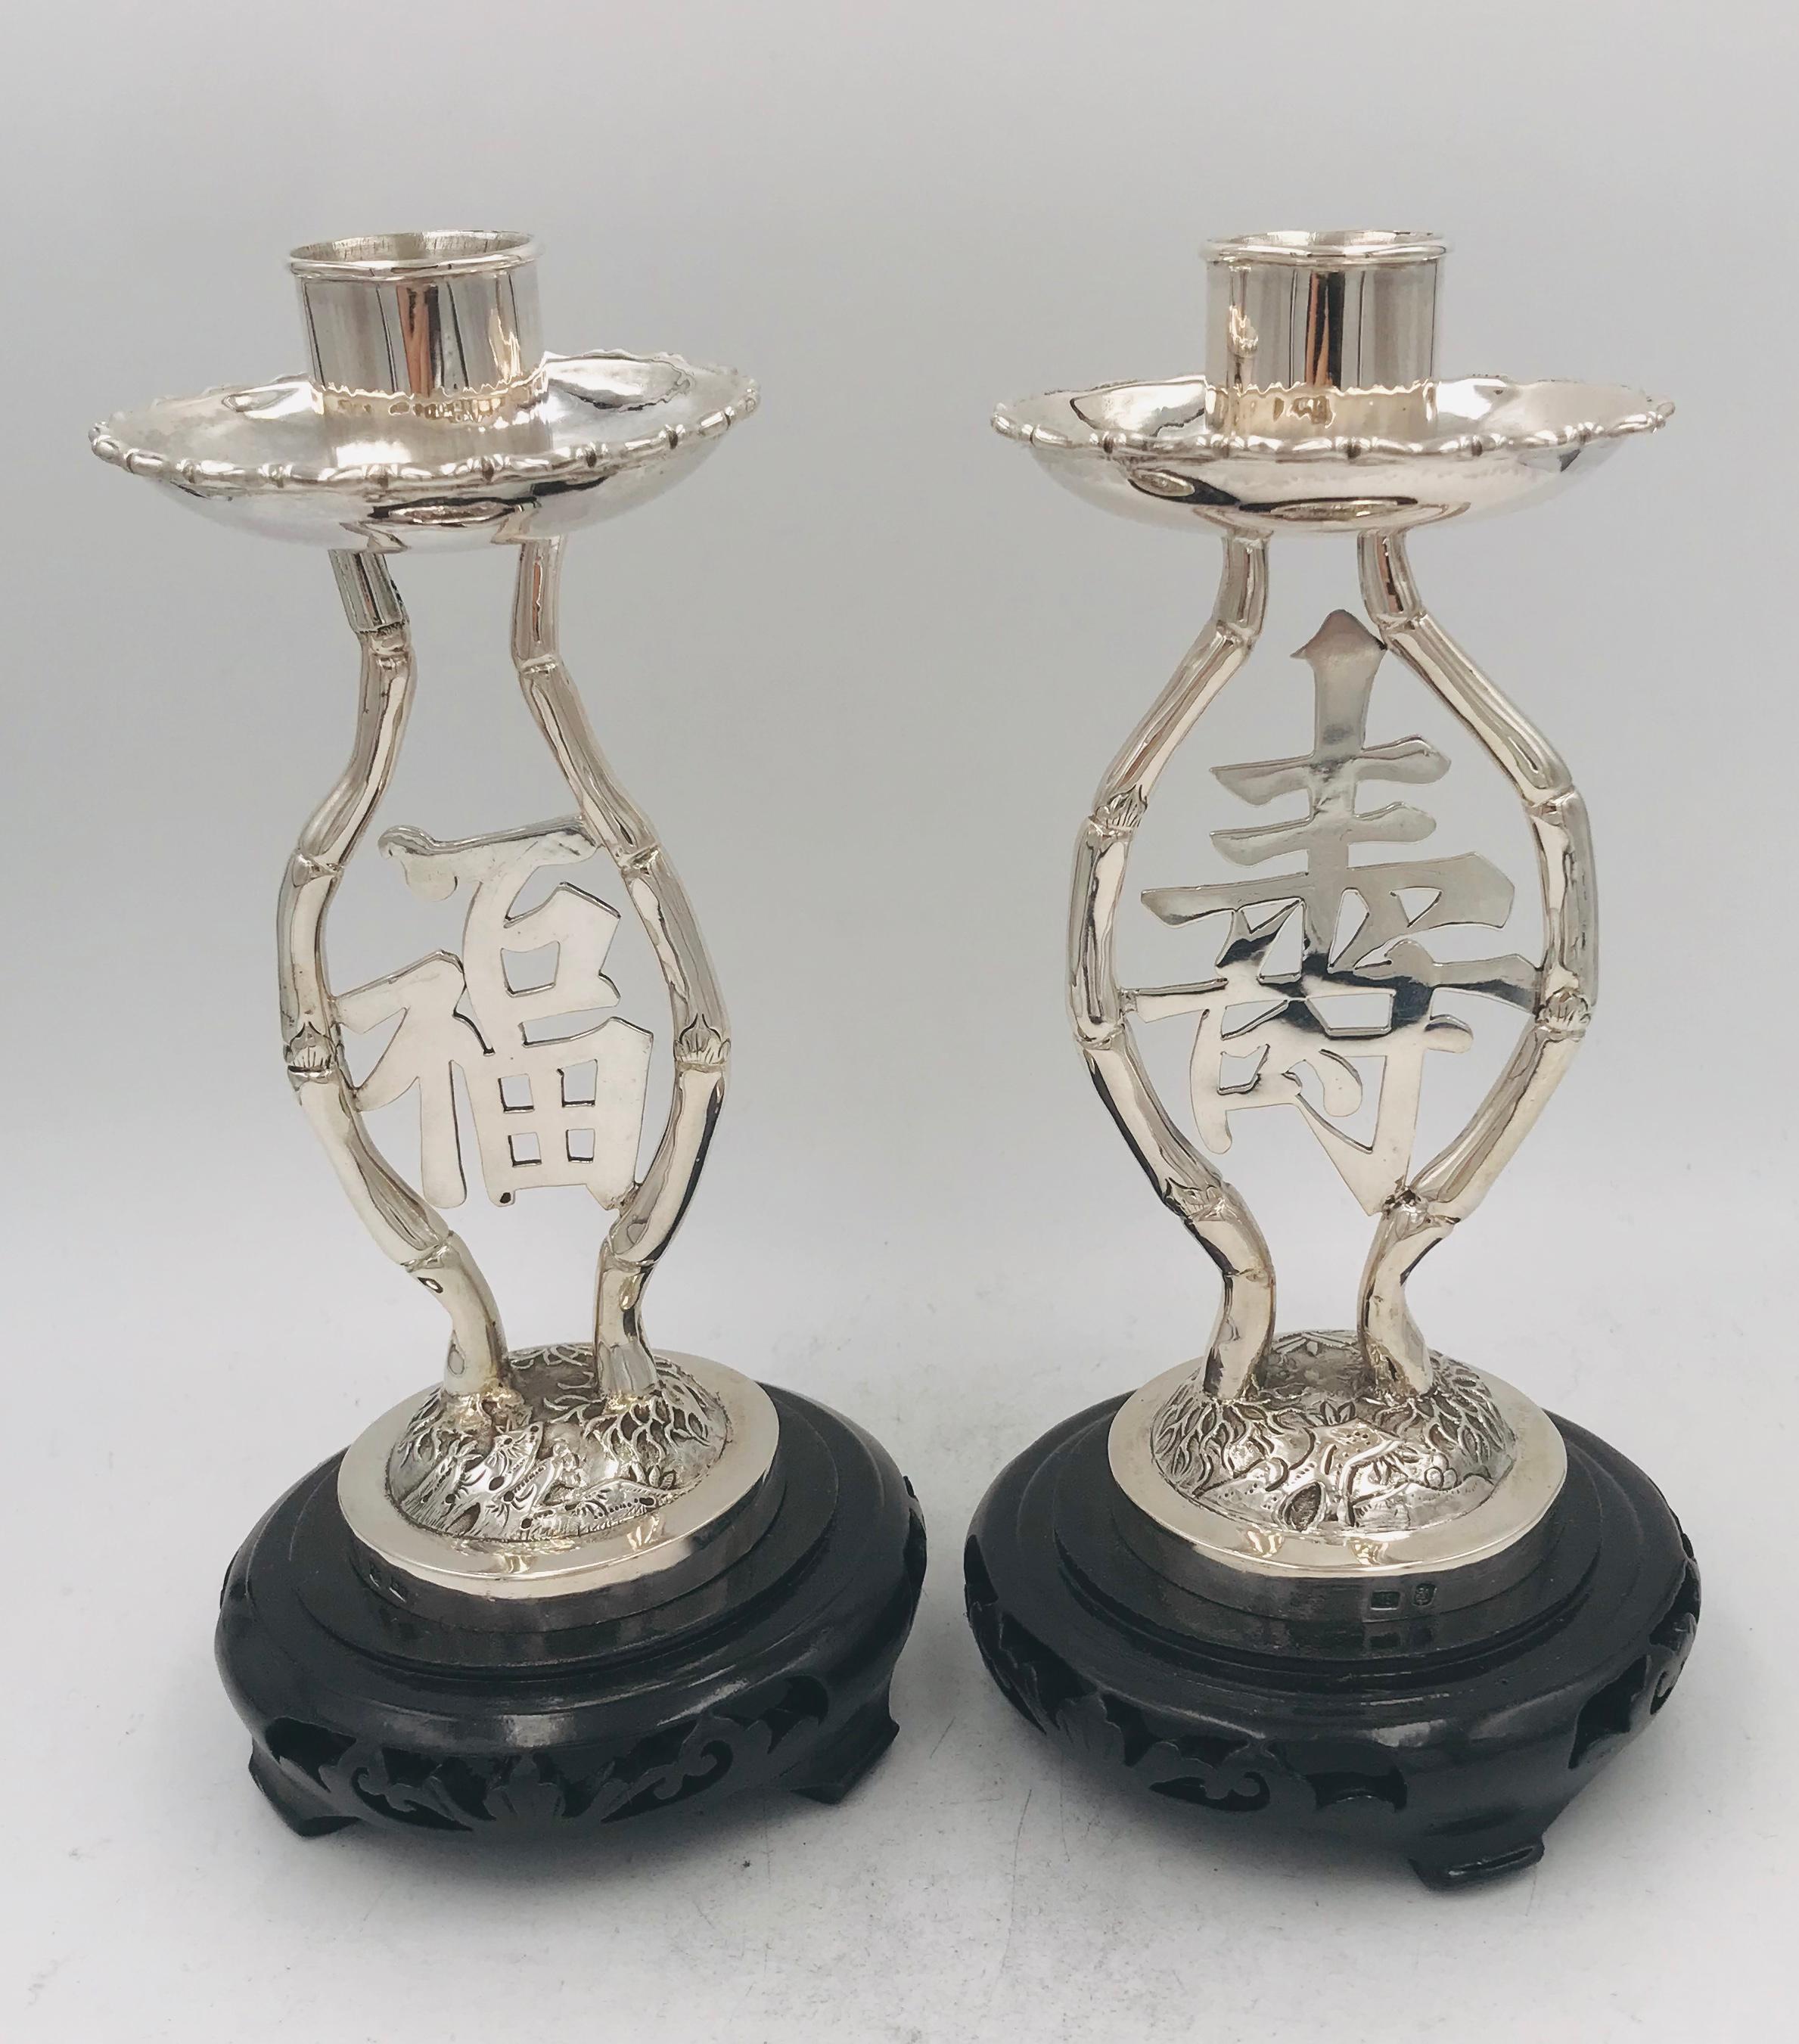 Pair of Chinese Export silver candlesticks with the character for 